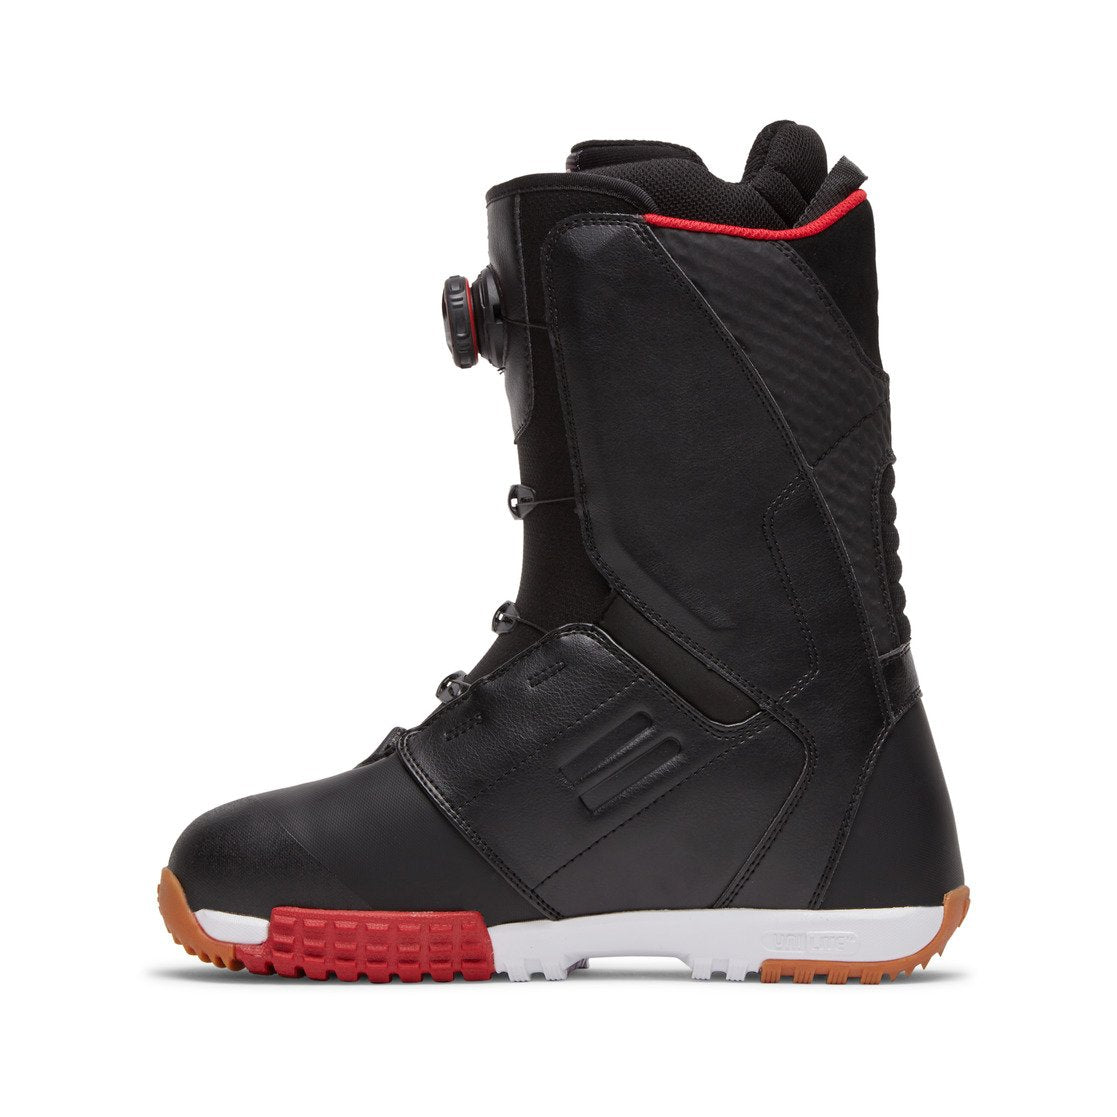 Control Snowboard Boots